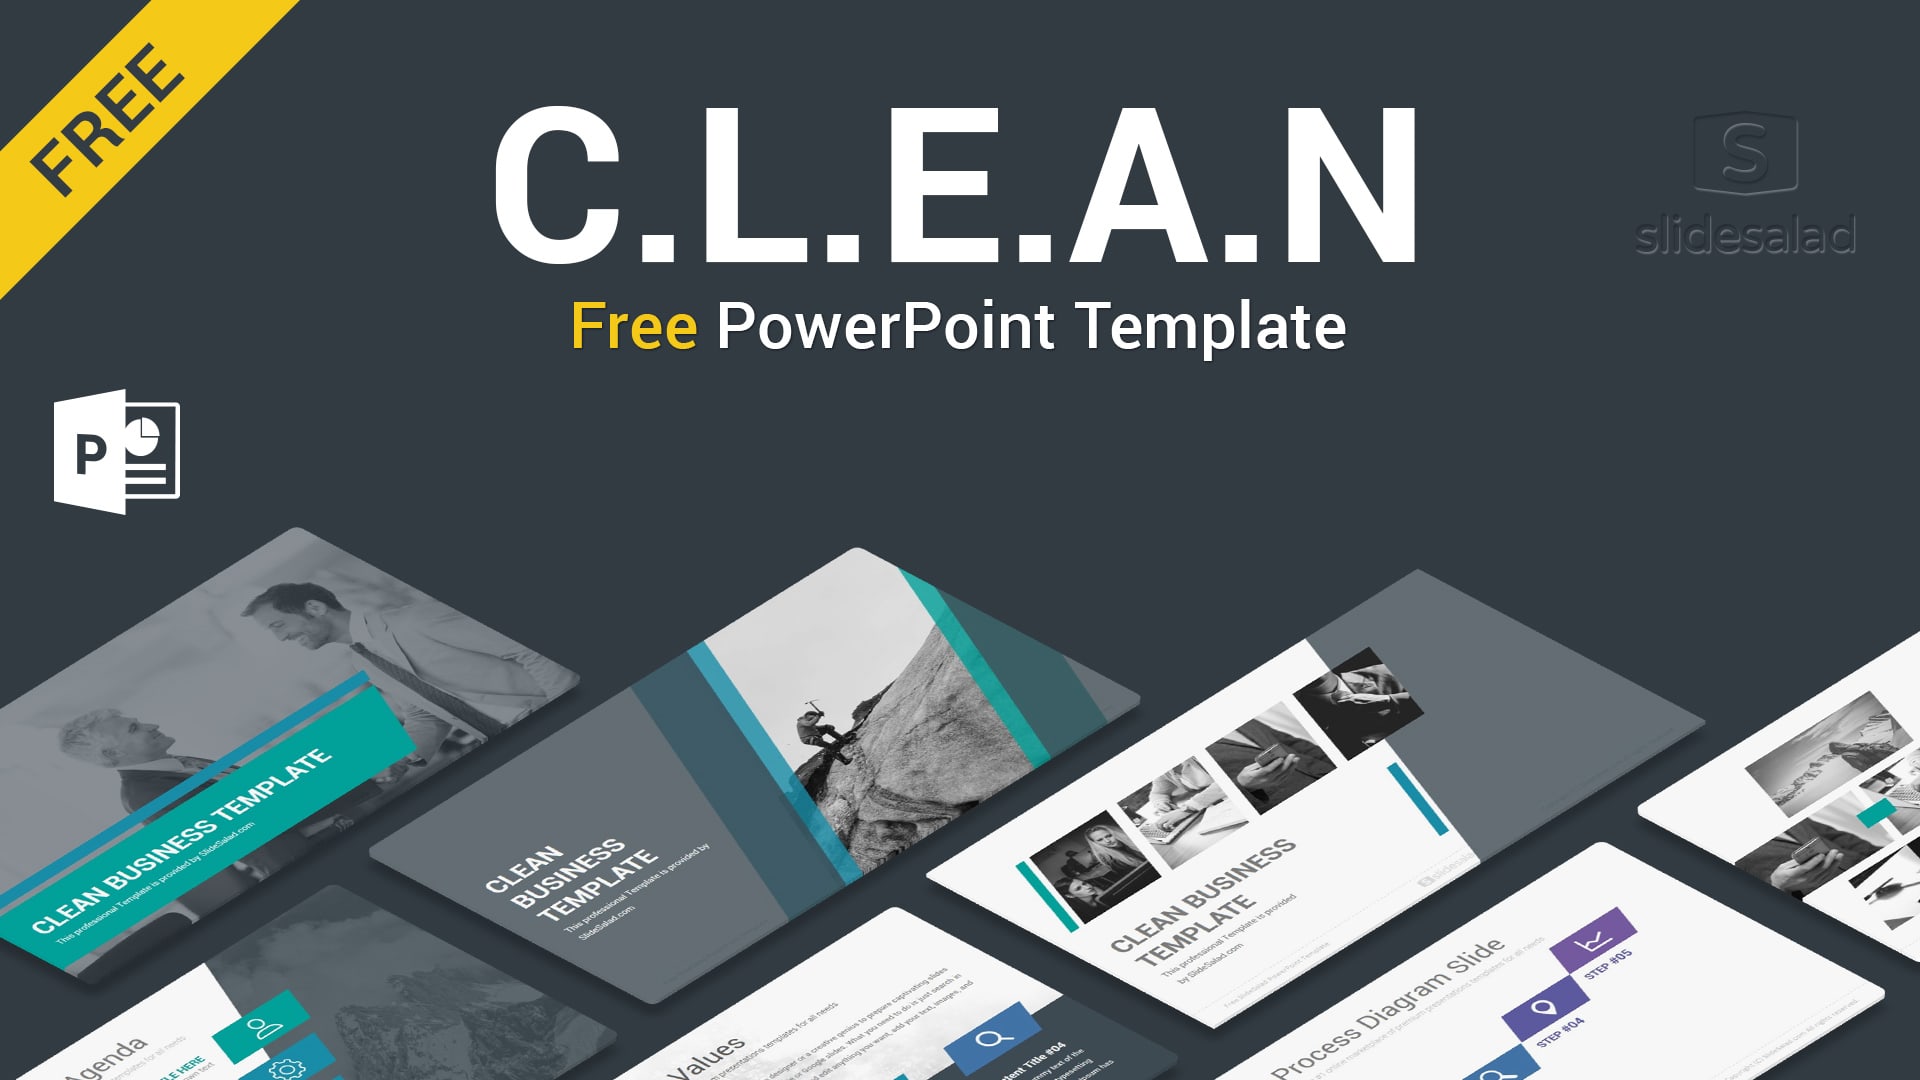 Clean Free PowerPoint Template - Free Download For Free Powerpoint Presentation Templates Downloads